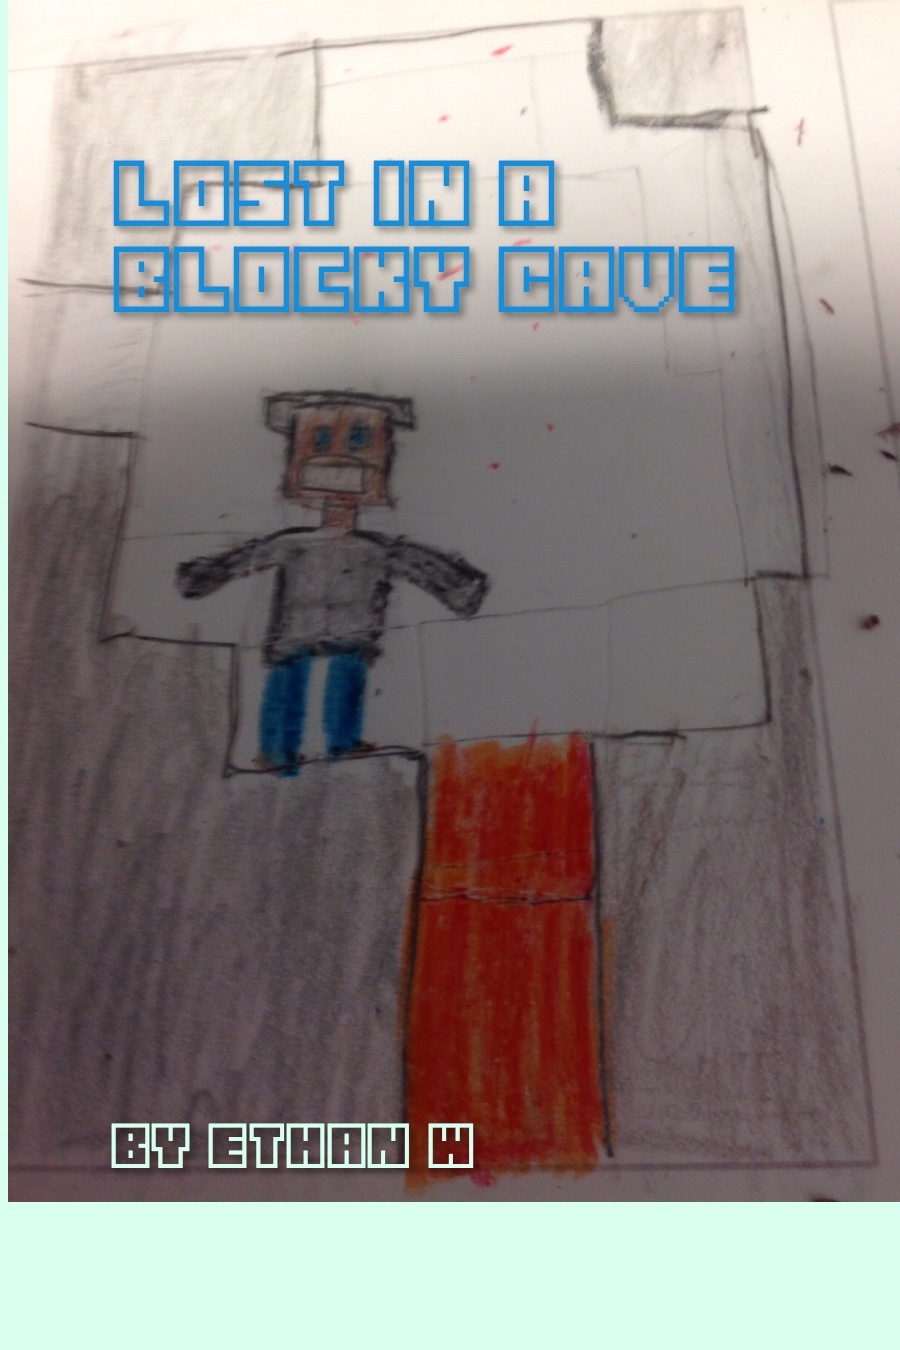 Lost in a Blocky Cave by Ethan W